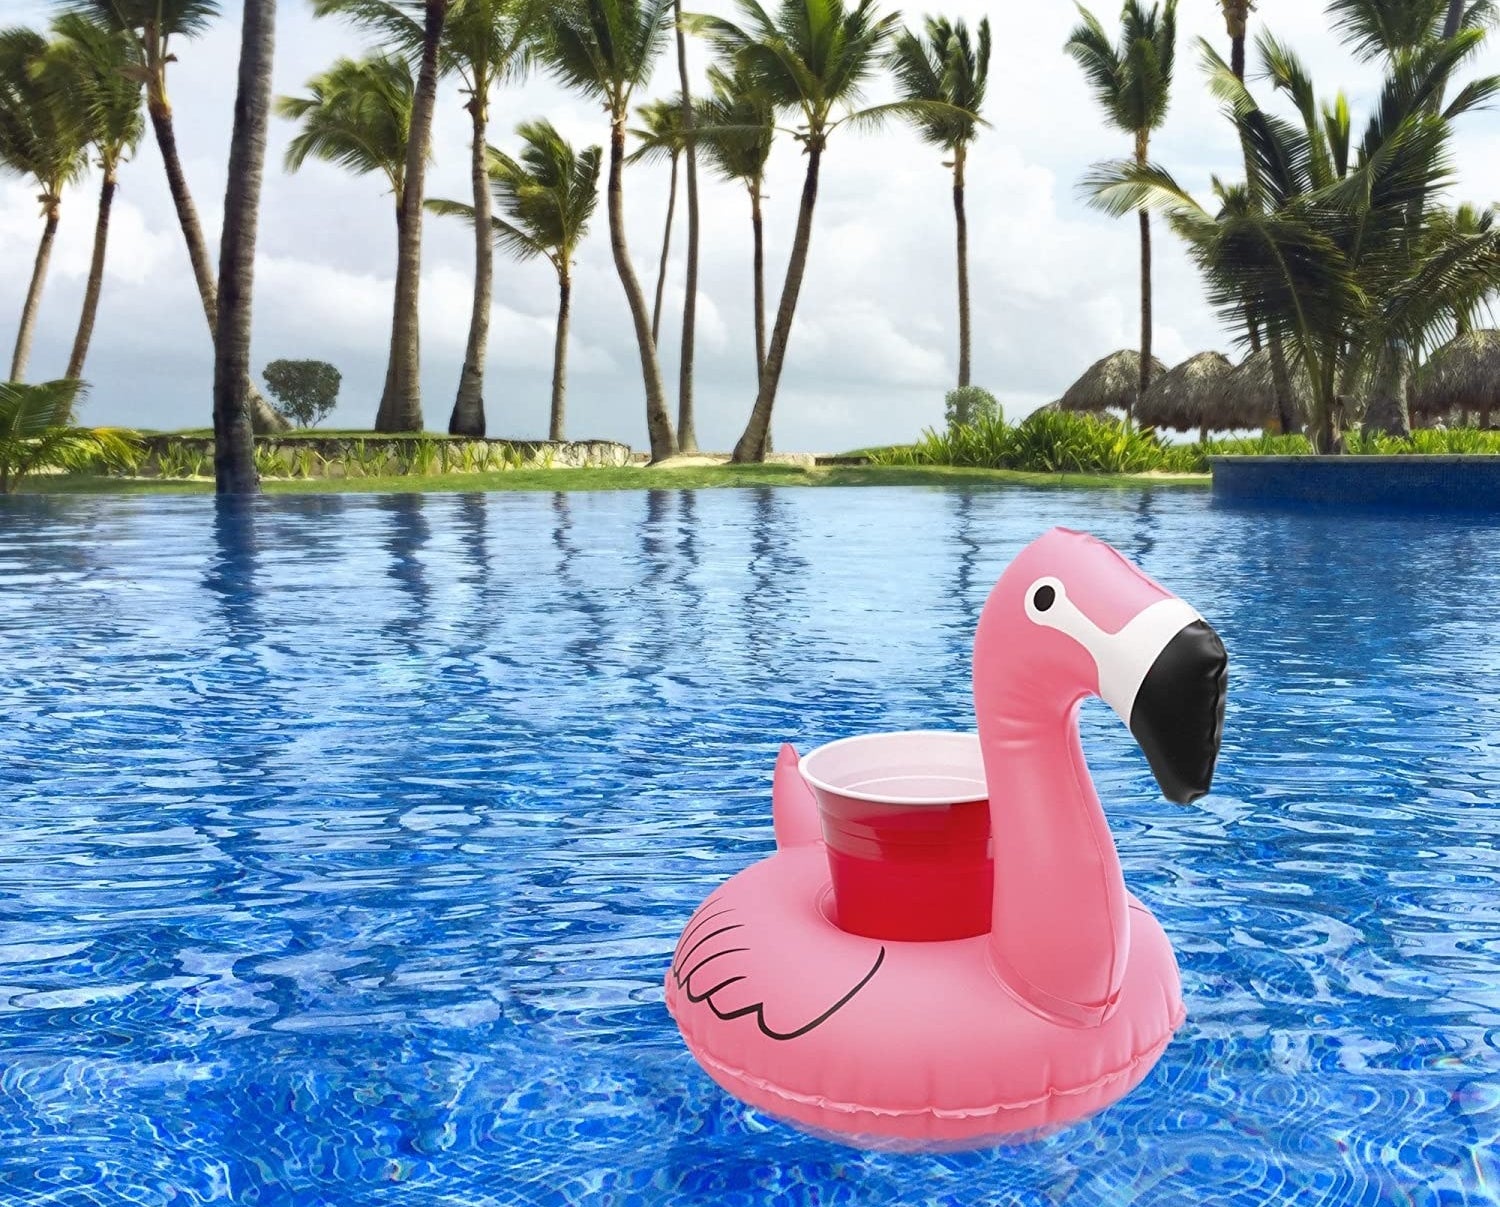 The flamingo drink float holding a red cup in a pool